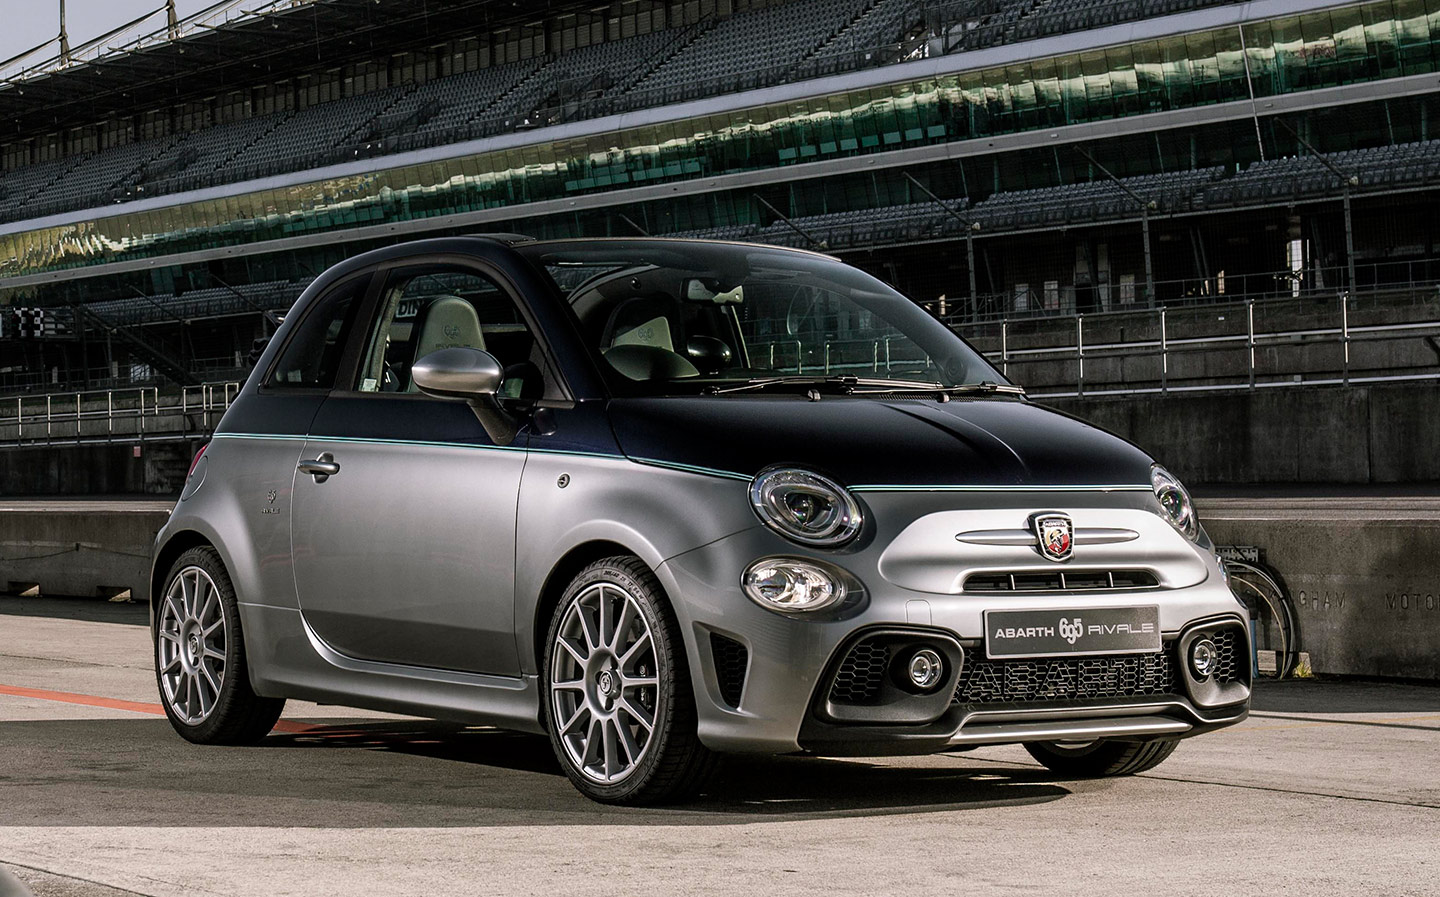 Jeremy Clarkson Abarth 695 Rivale review for Sunday Times